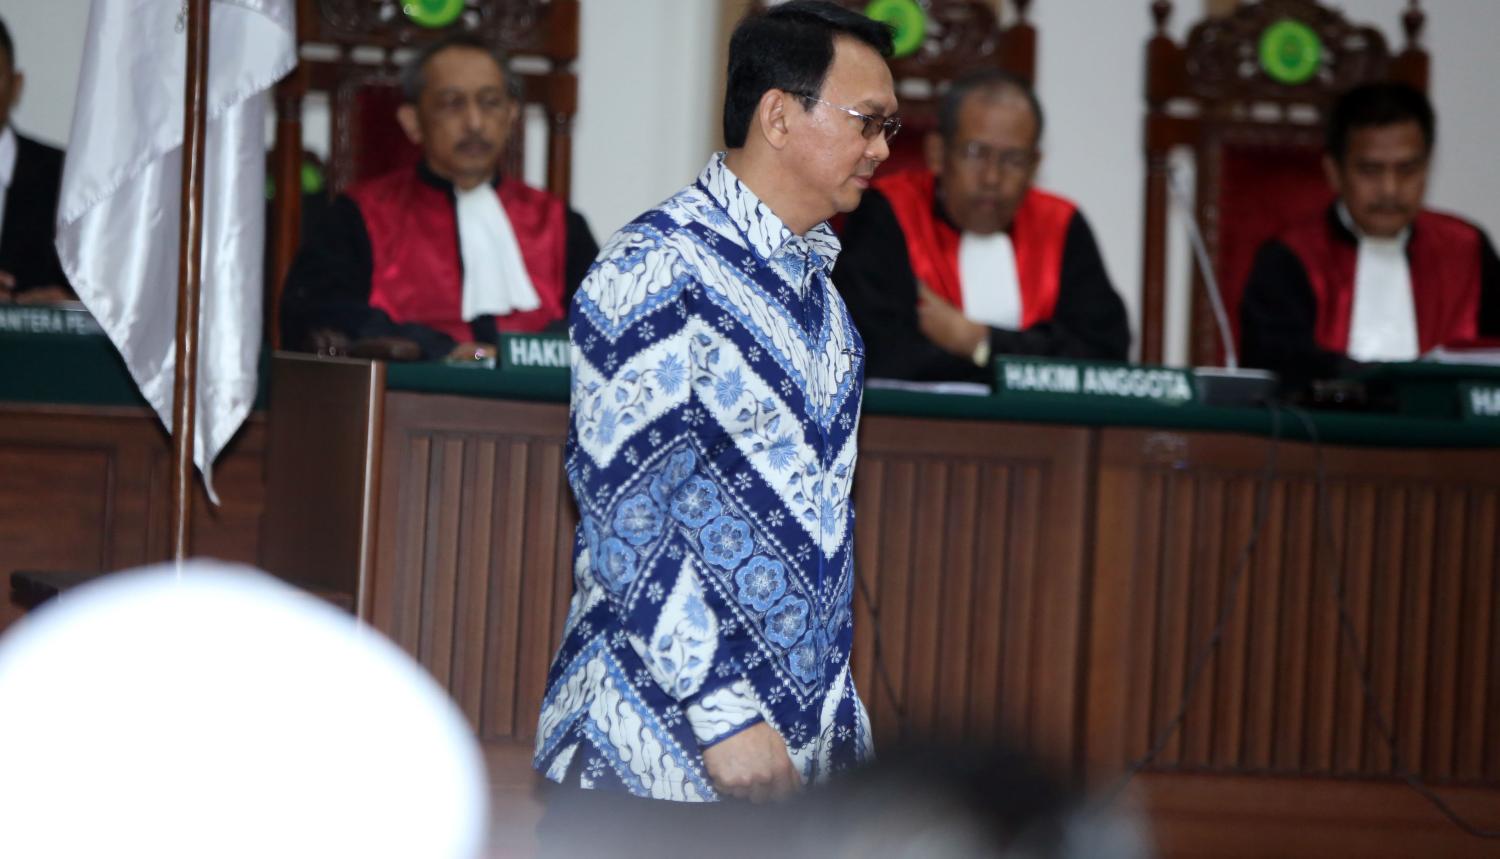 Governor Ahok arrives at a Jakarta courtroom for his verdict and sentence in his blasphemy trial. (Getty/Barcroft Media)